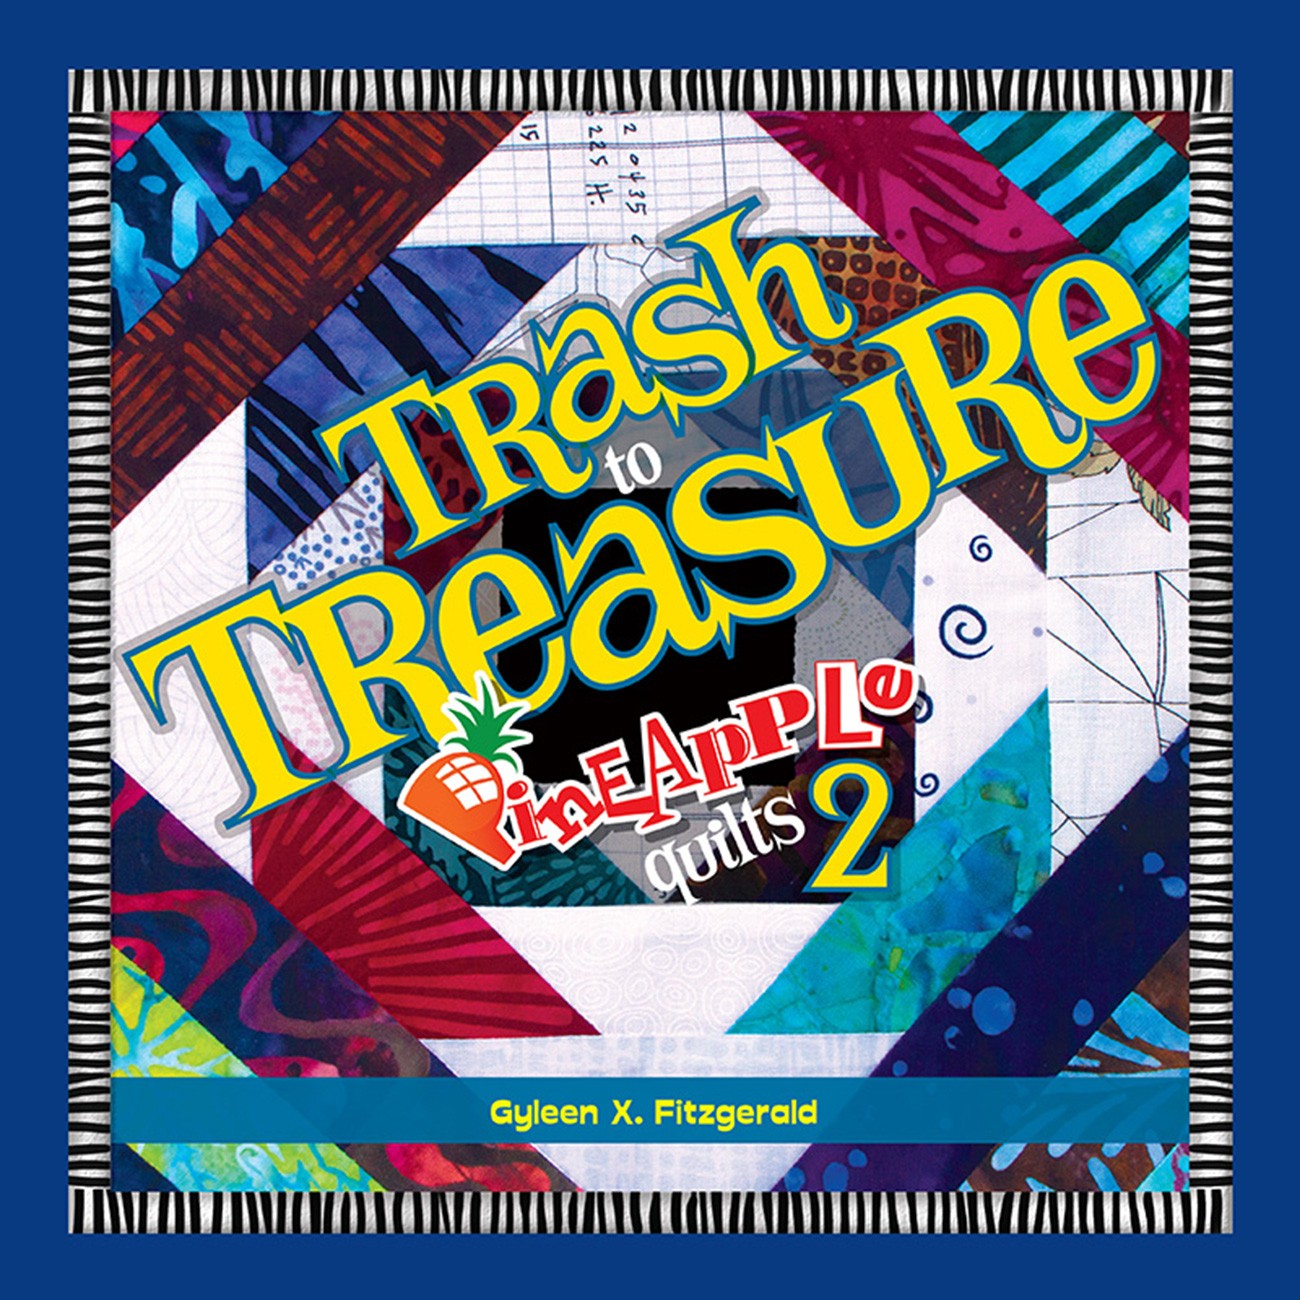 Trash To Treasure Pineapple Quilts 2 Quilt Pattern Book by Gyleen X Fitzgerald of Colourful Stitches